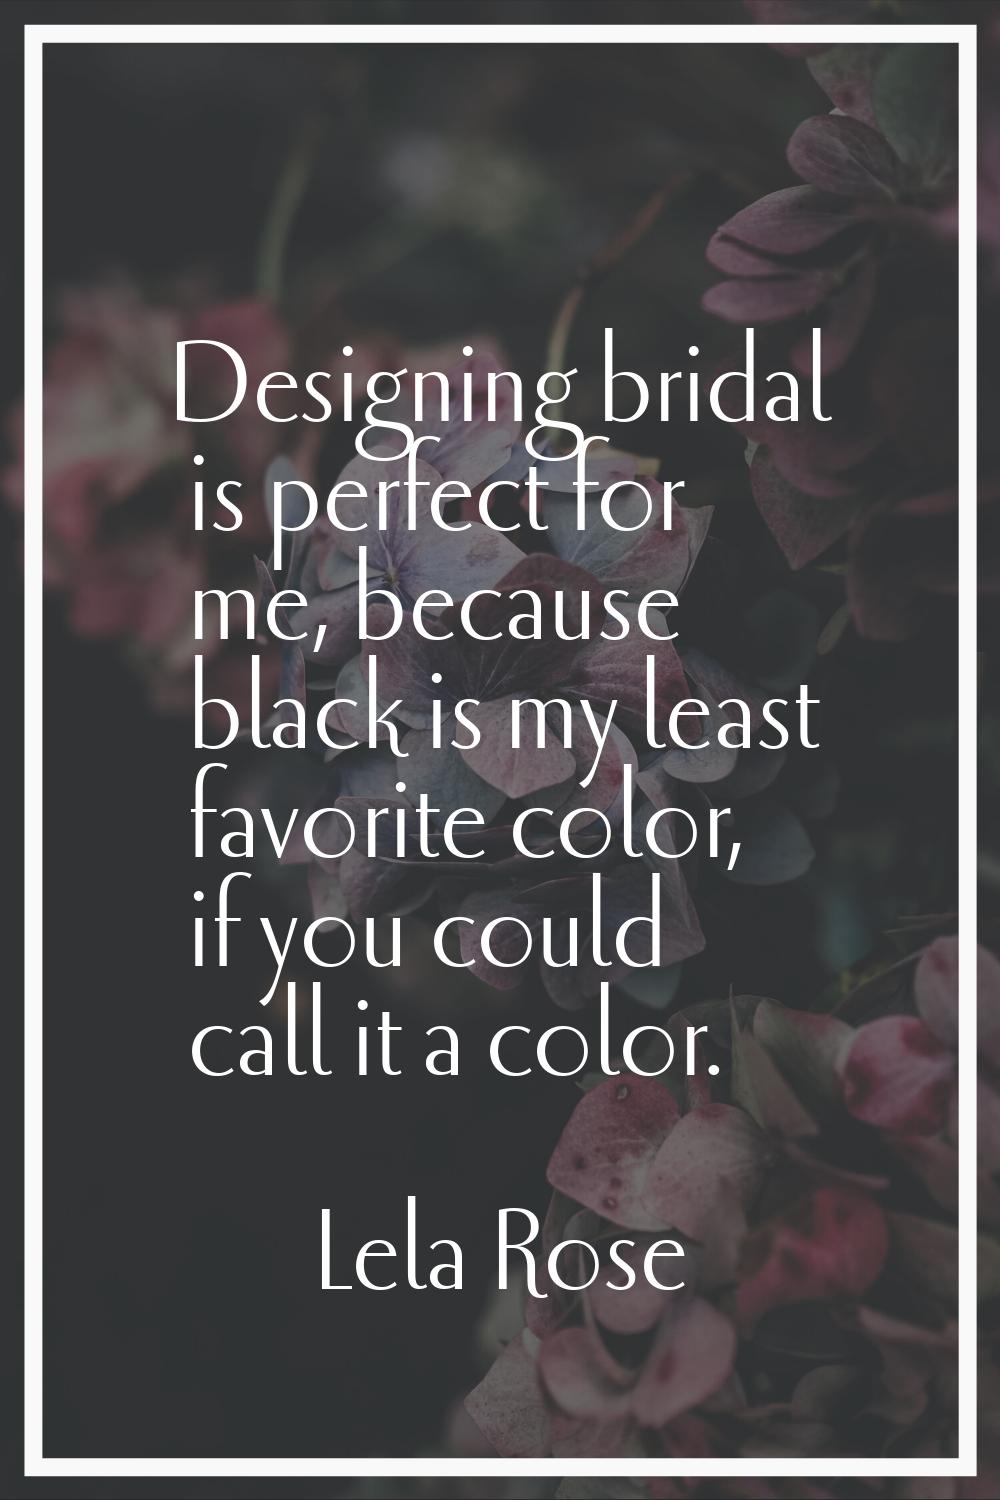 Designing bridal is perfect for me, because black is my least favorite color, if you could call it 